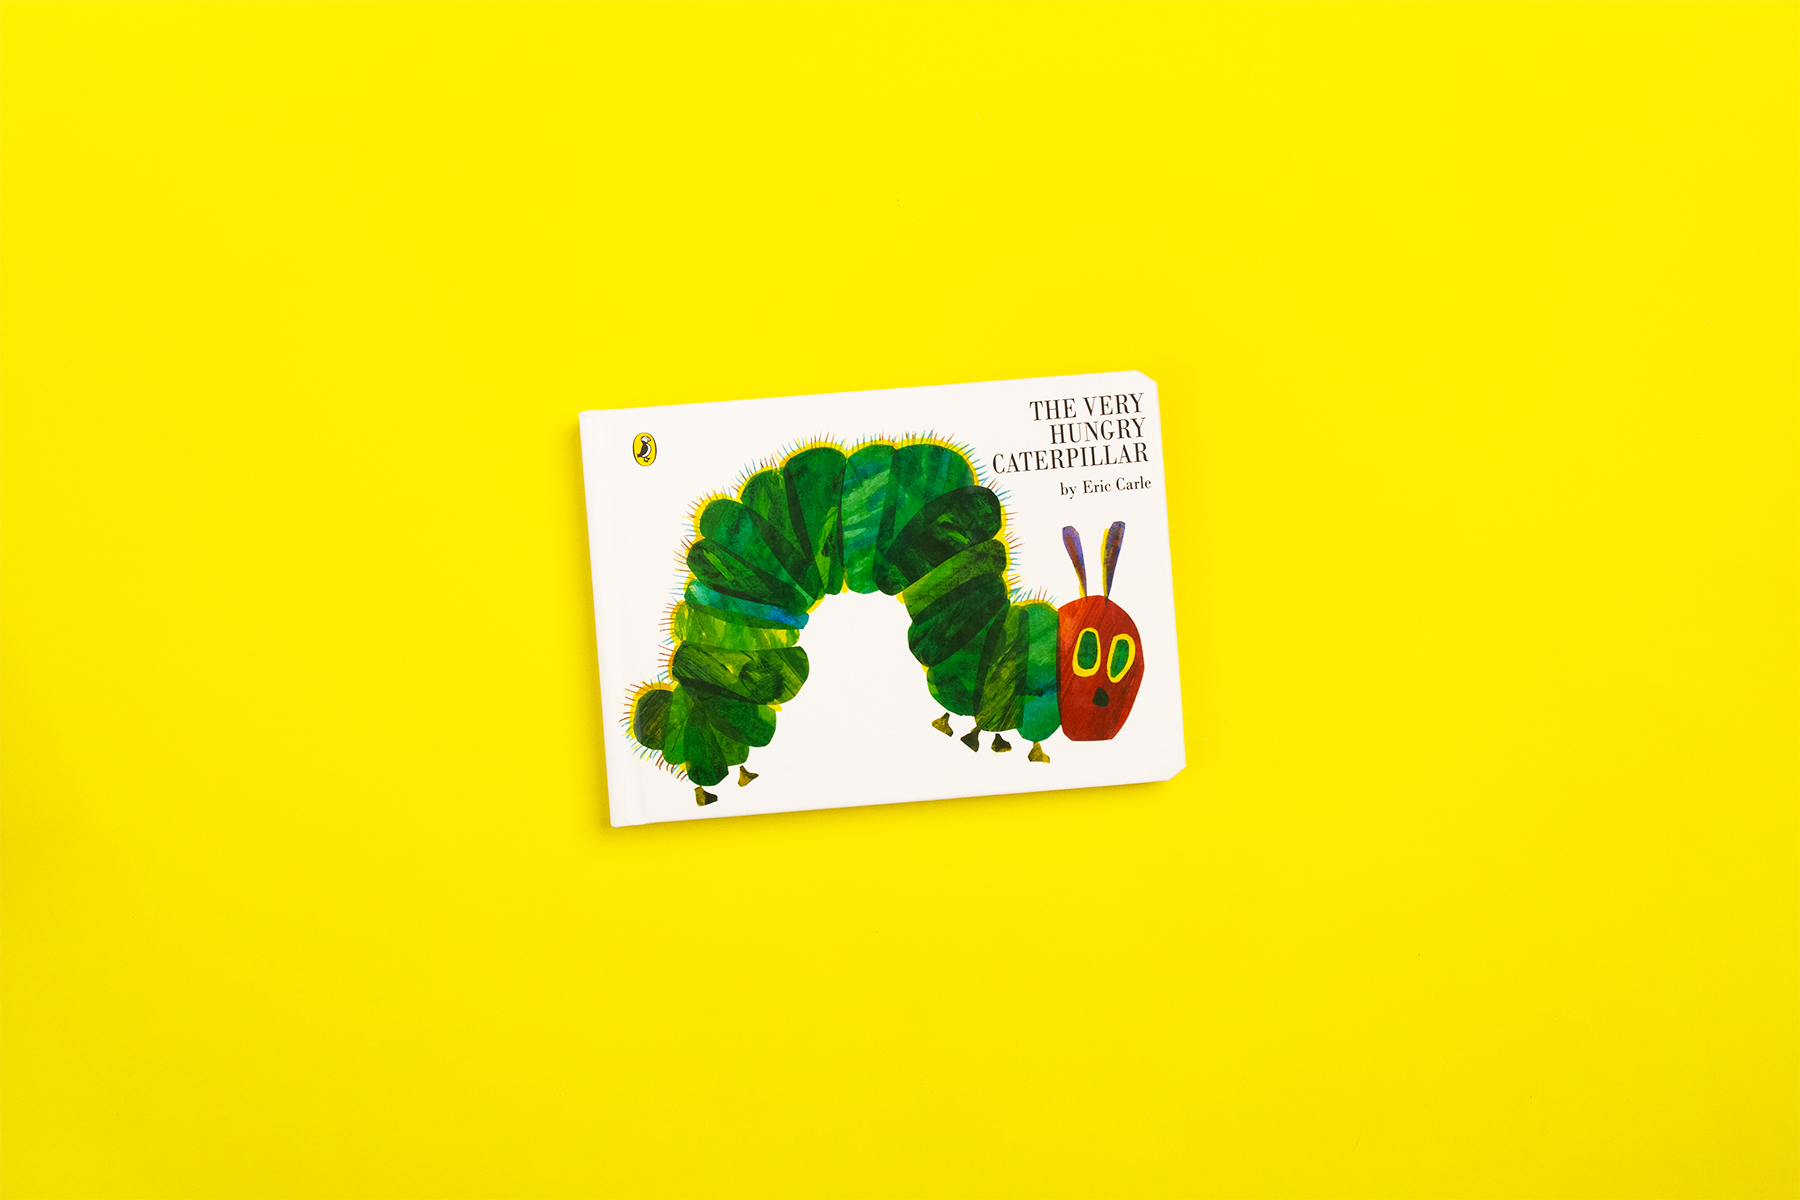 A photo of the book The Very Hungry Caterpillar by Eric Carle on a plain yellow background